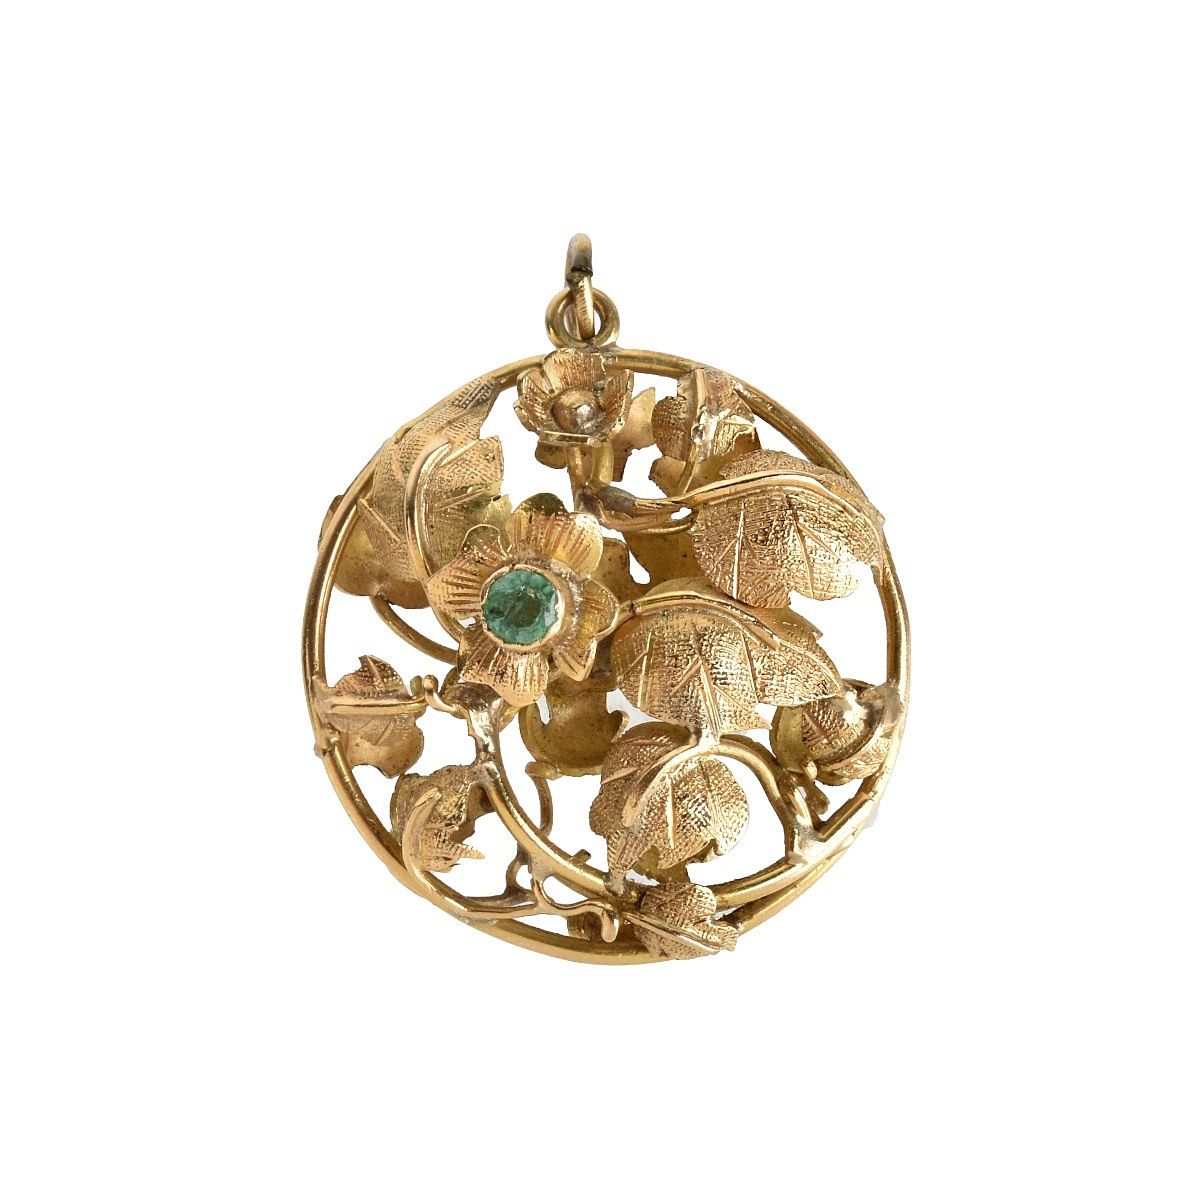 18K and Emerald Pendant sold at auction on 17th April | Bidsquare